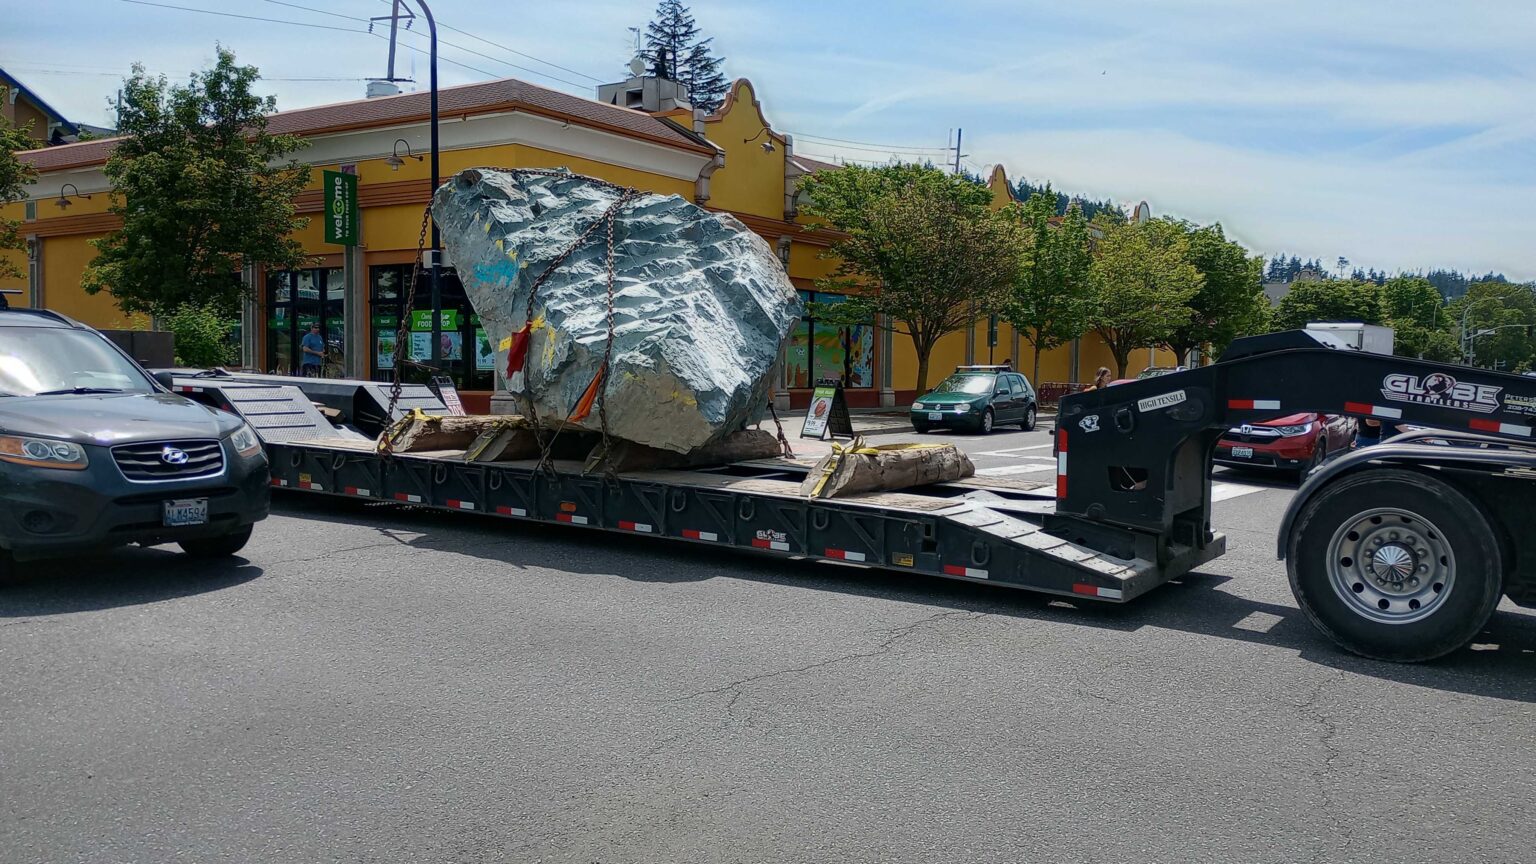 A tractor-trailer hauls a large basalt boulder through downtown Bellingham in June. This unusual cargo has been a regular sight on city streets over the past several months.